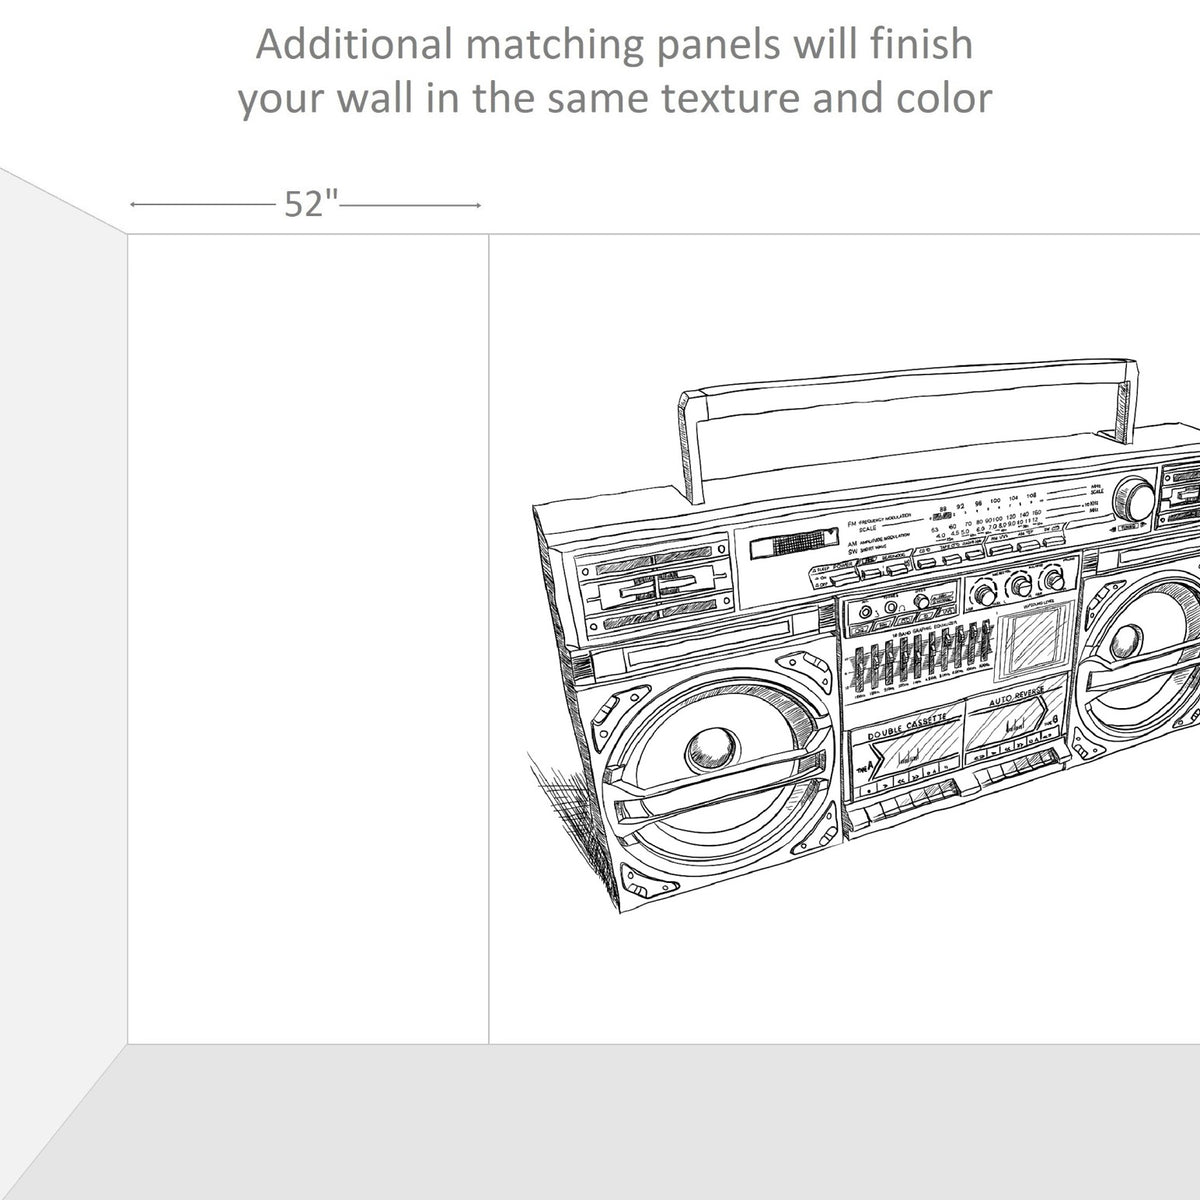 A BOOMBOX drawing with additional peel and stick wall mural extension panels will make your wall complete.